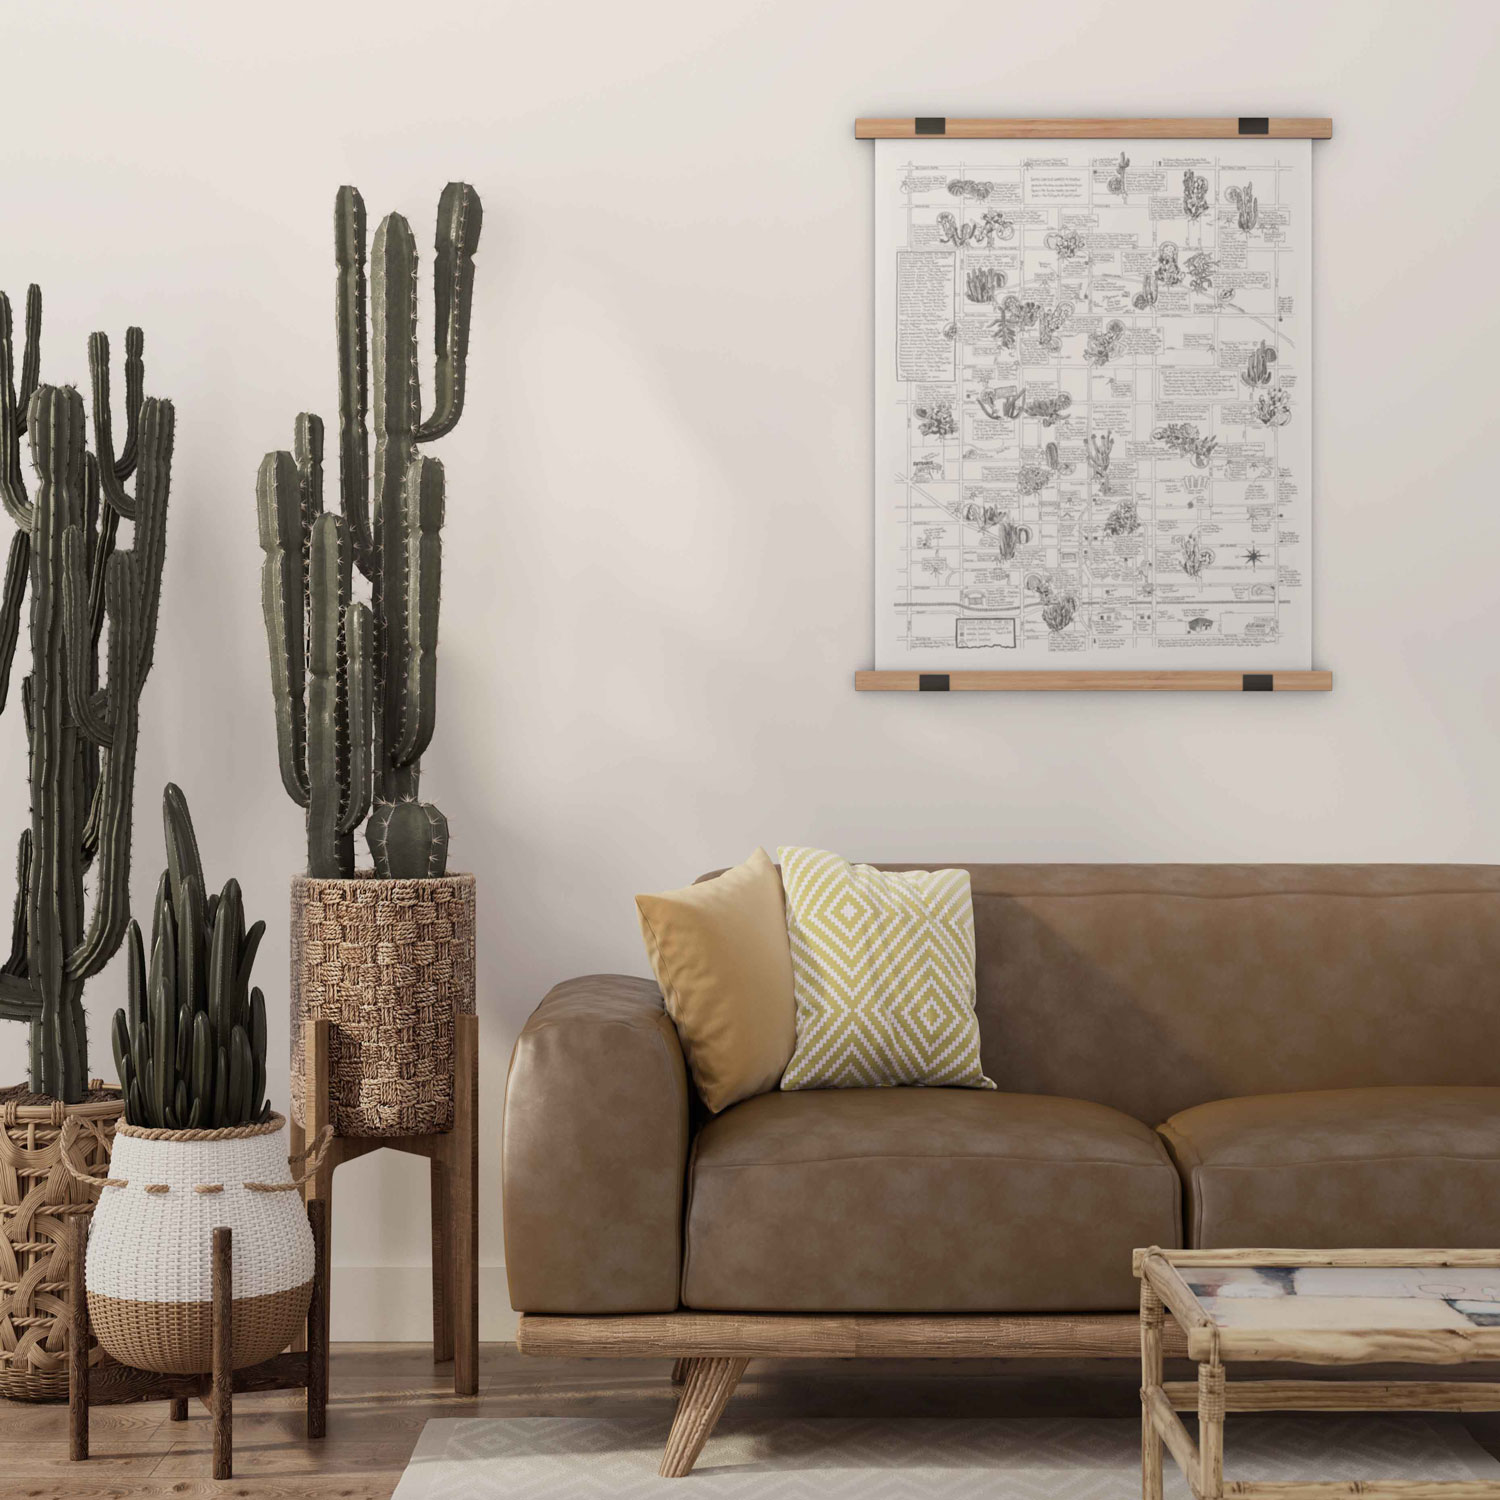 living room with cactus and cactus map on wall